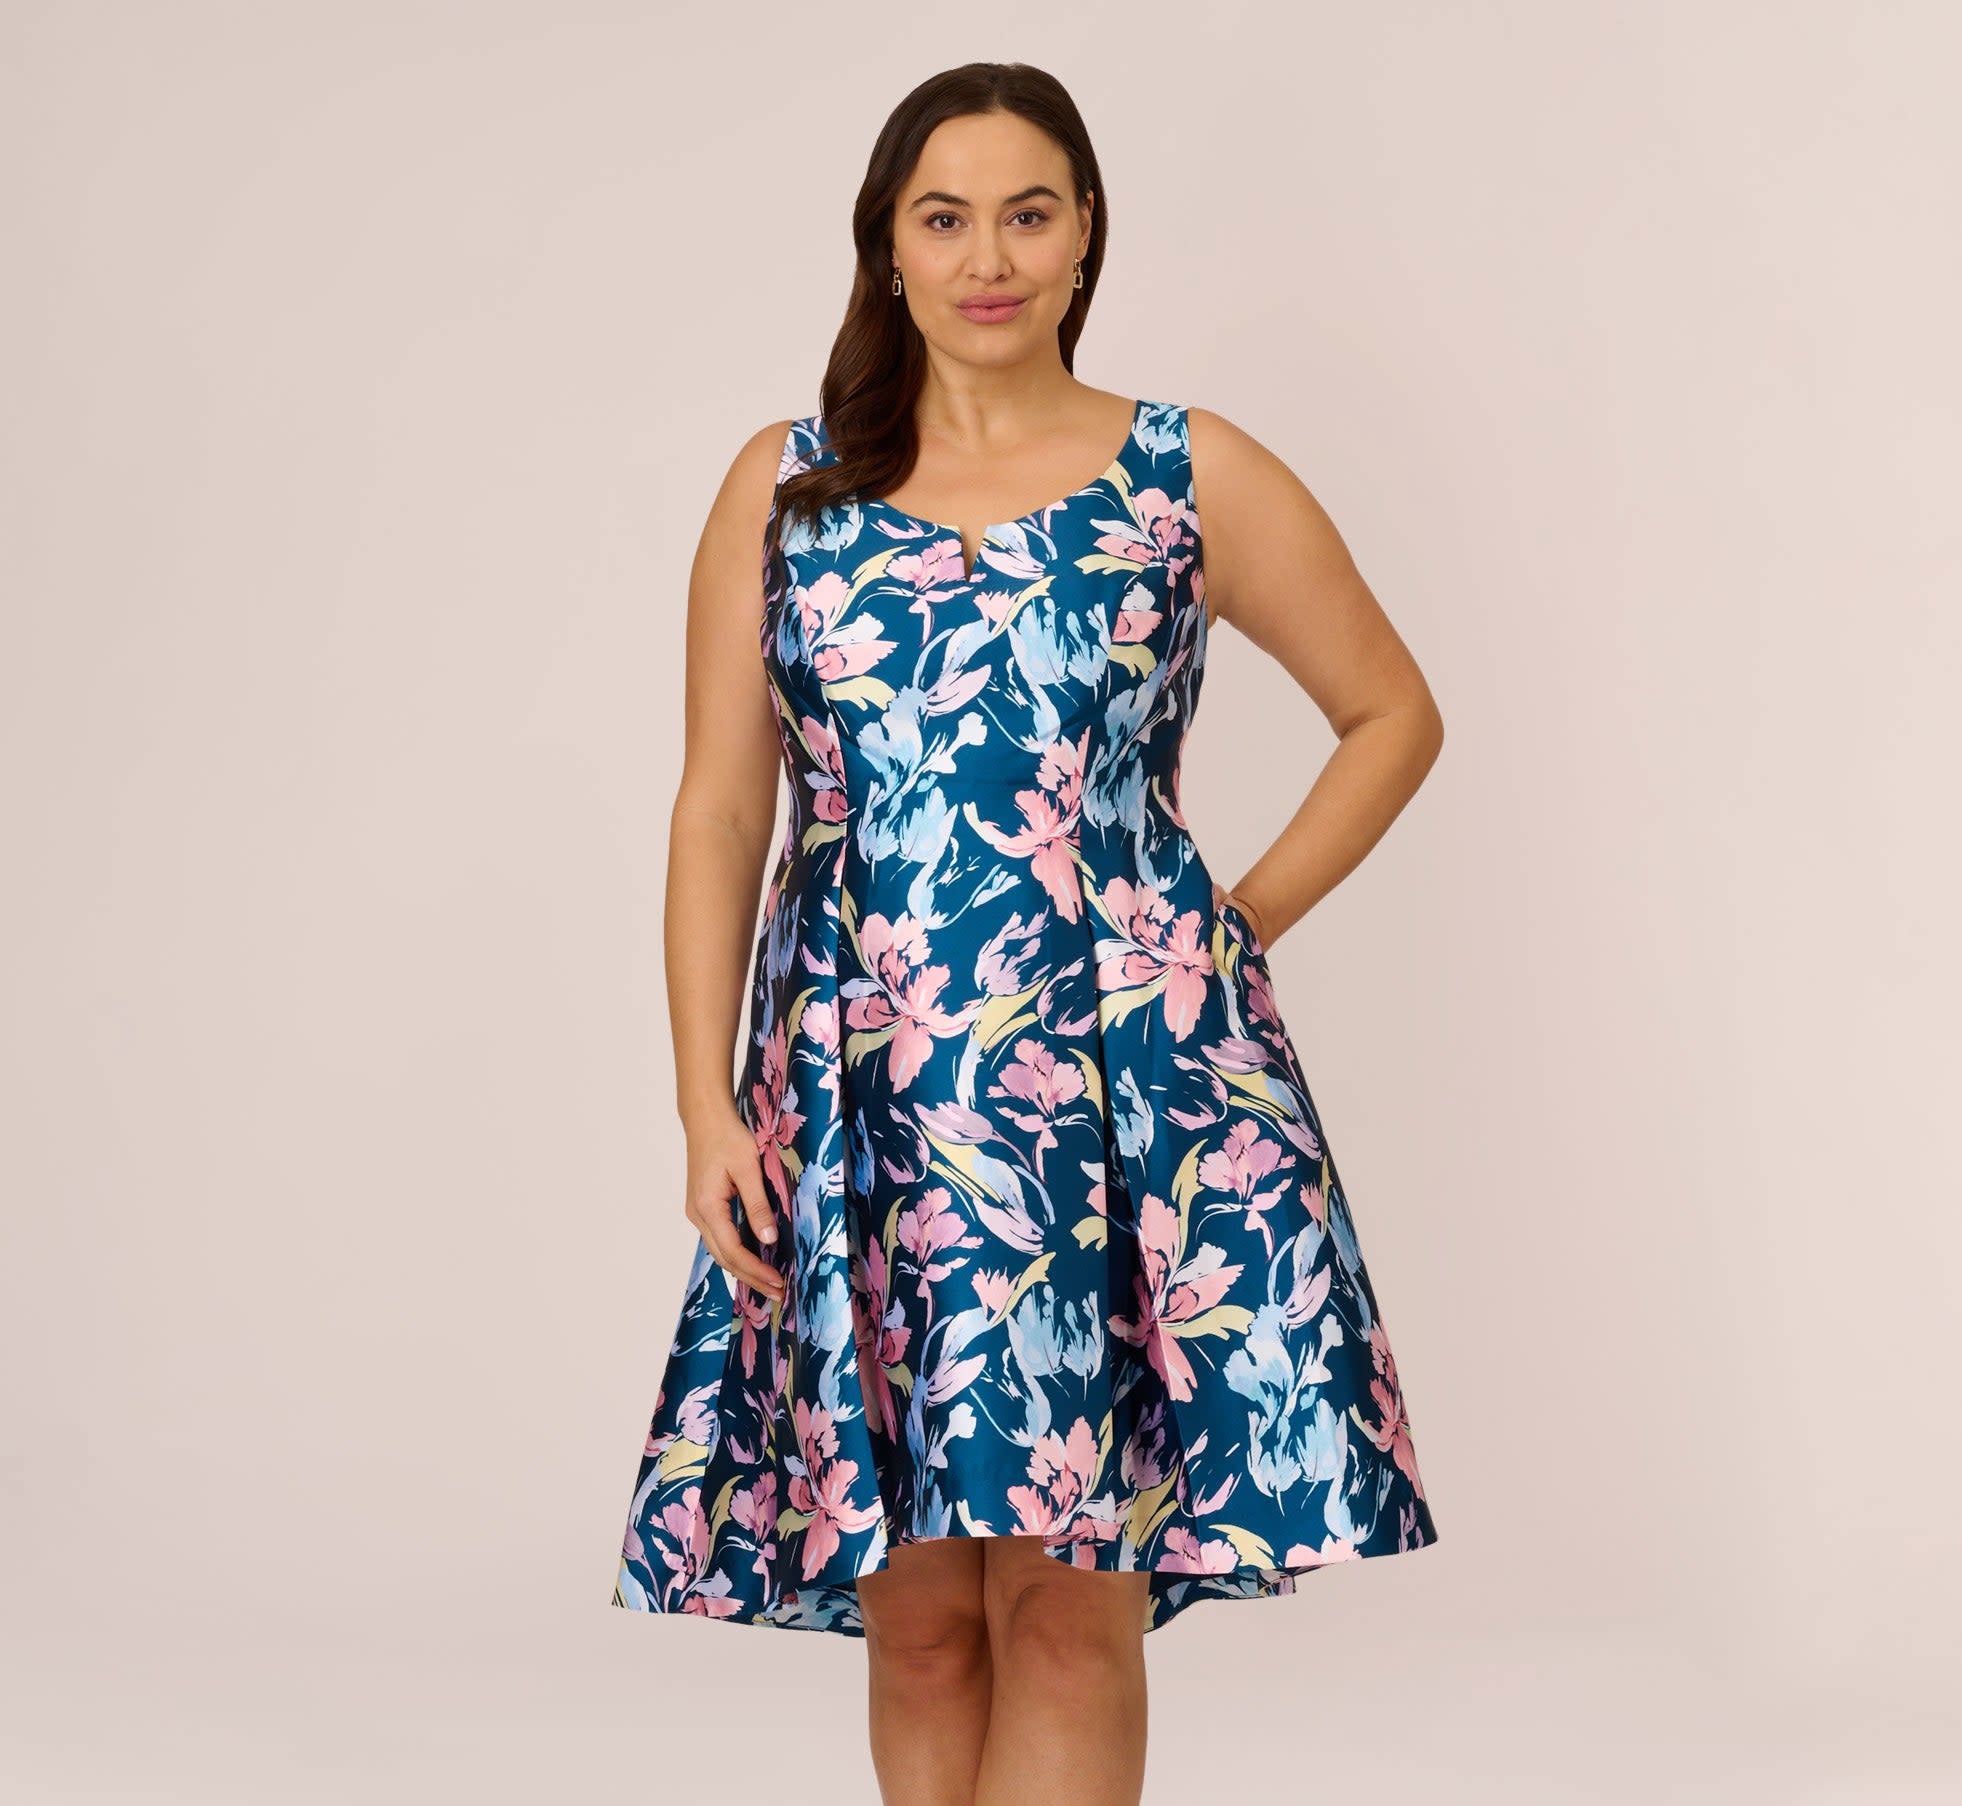 ADRIANNA PAPELL ADRIANNA PAPELL PRINTED MIKADO HIGH-LOW DRESSES